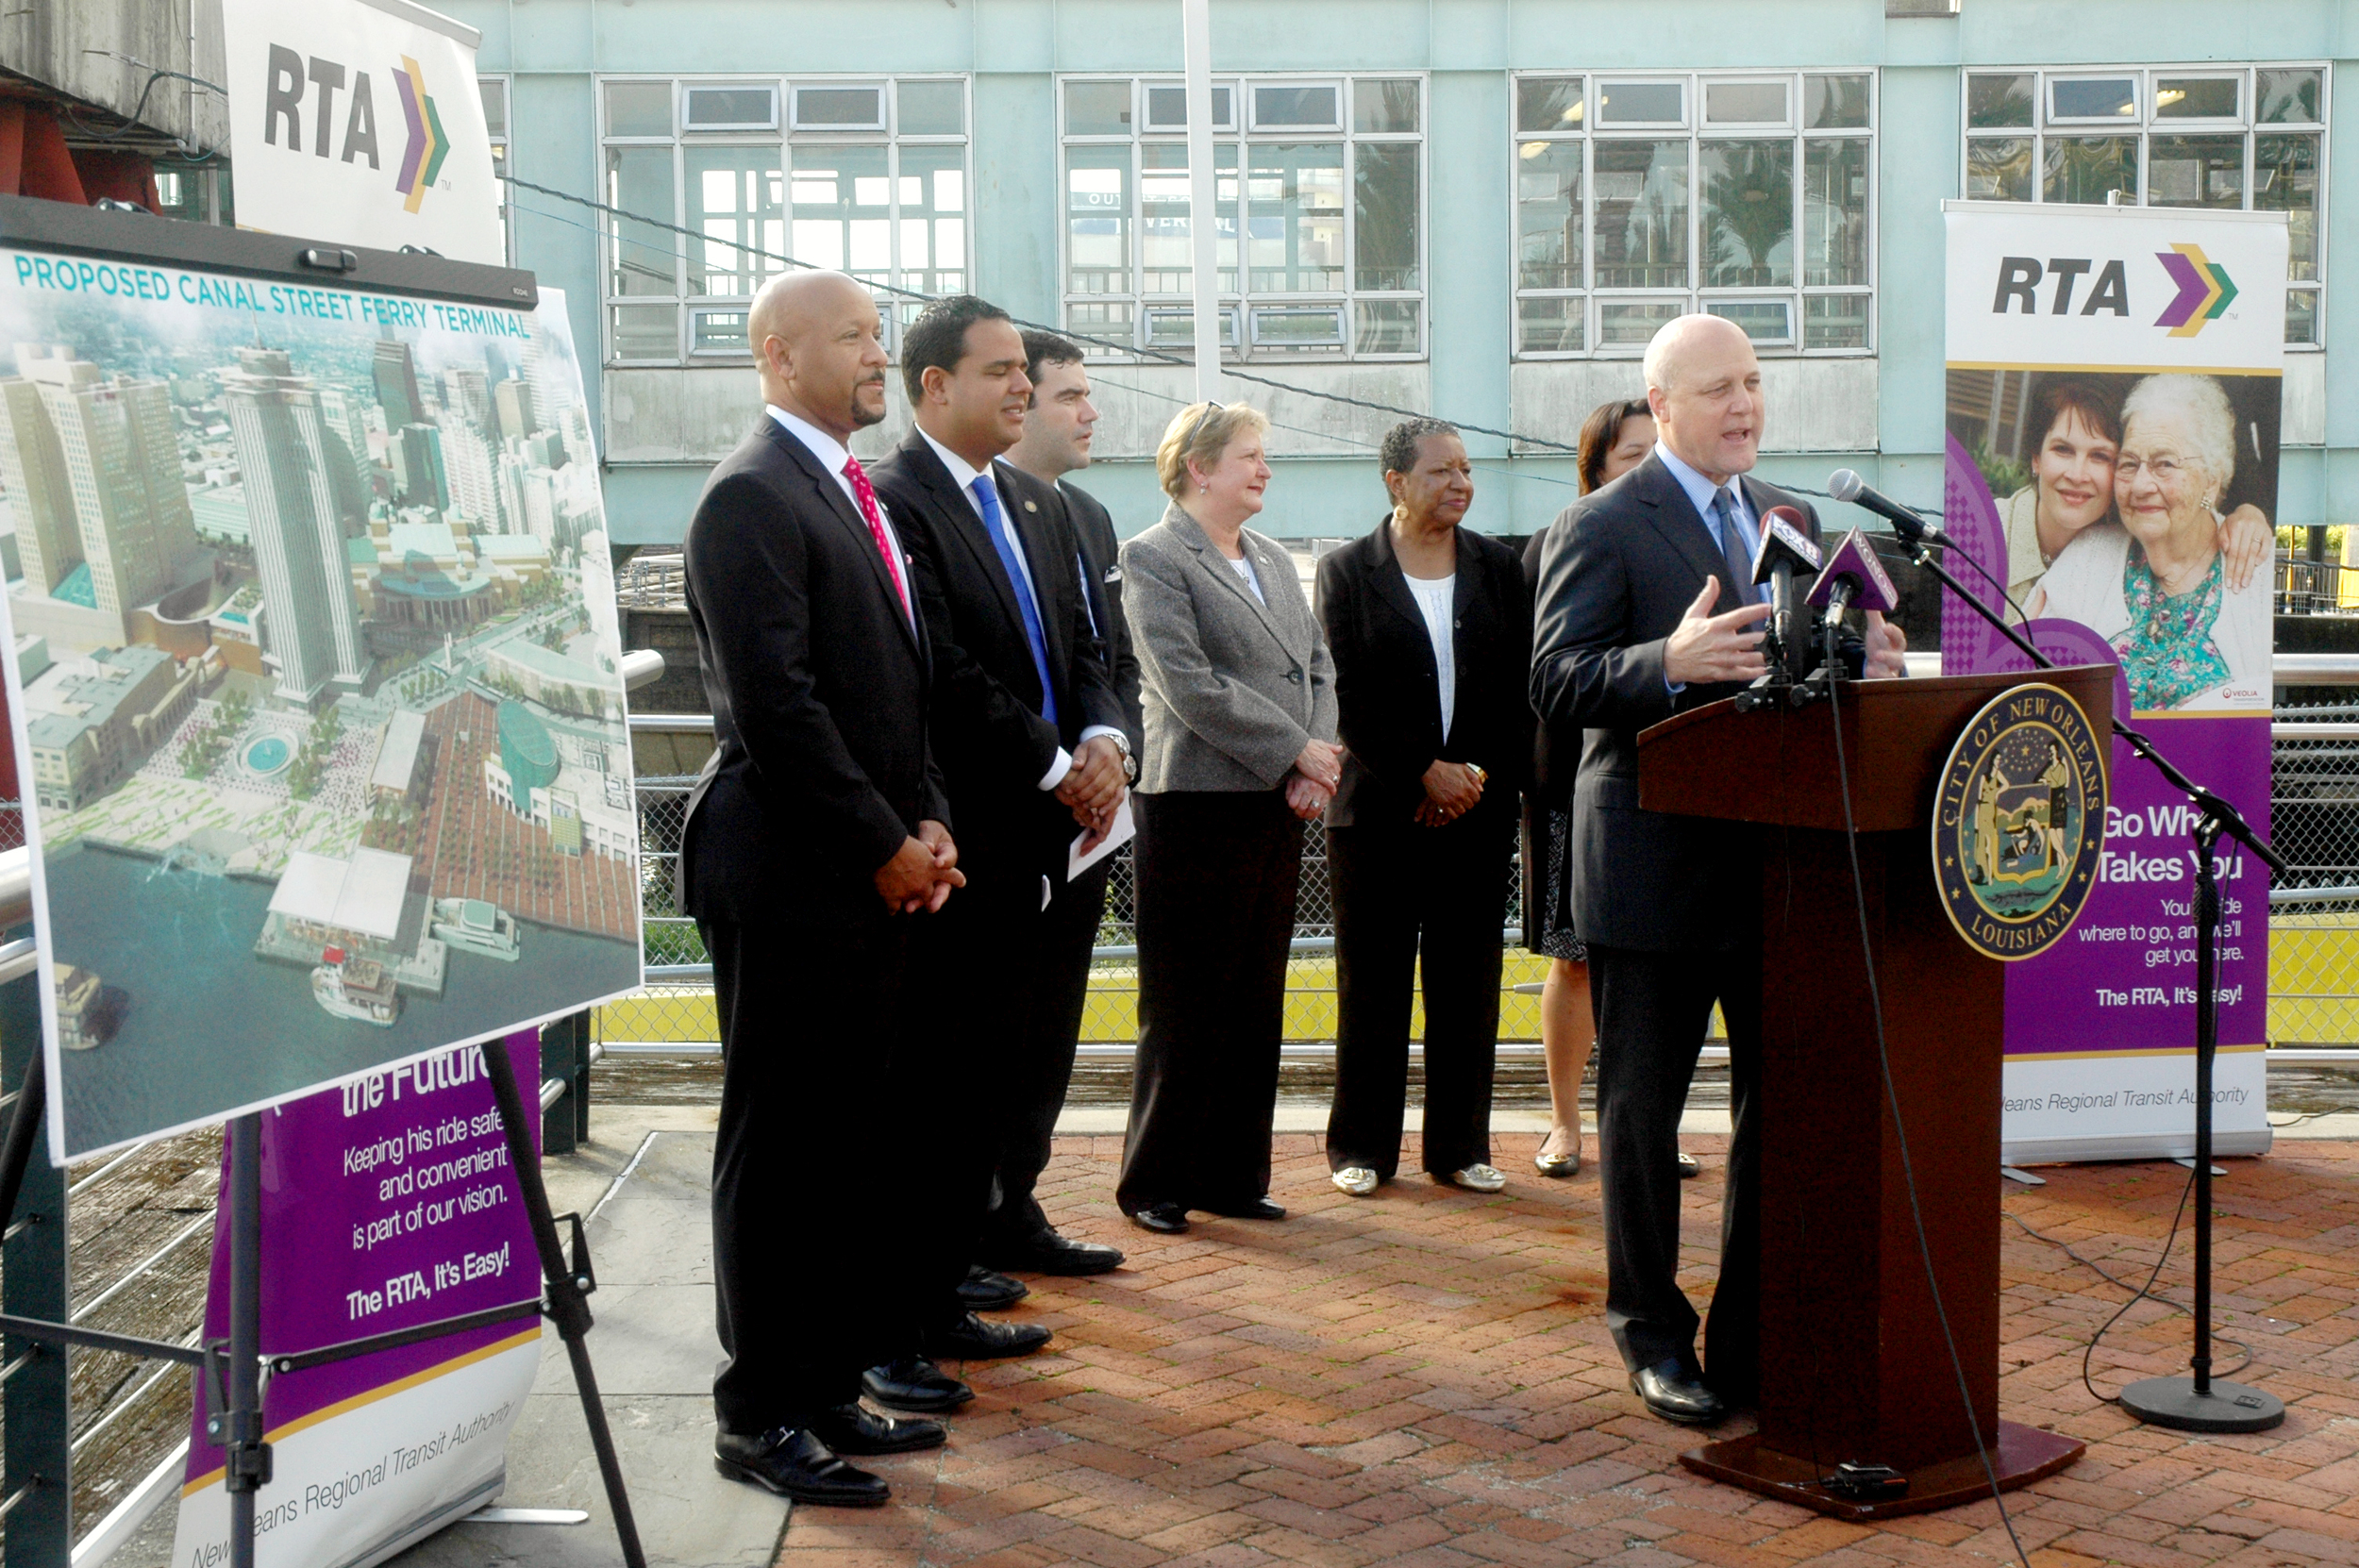  City of New Orleans Mayor Mitch Landrieu announces plans to renovate the Canal Street Ferry Terminal &nbsp;during a press conference in Woldenberg Park Nov. 5, 2015. 